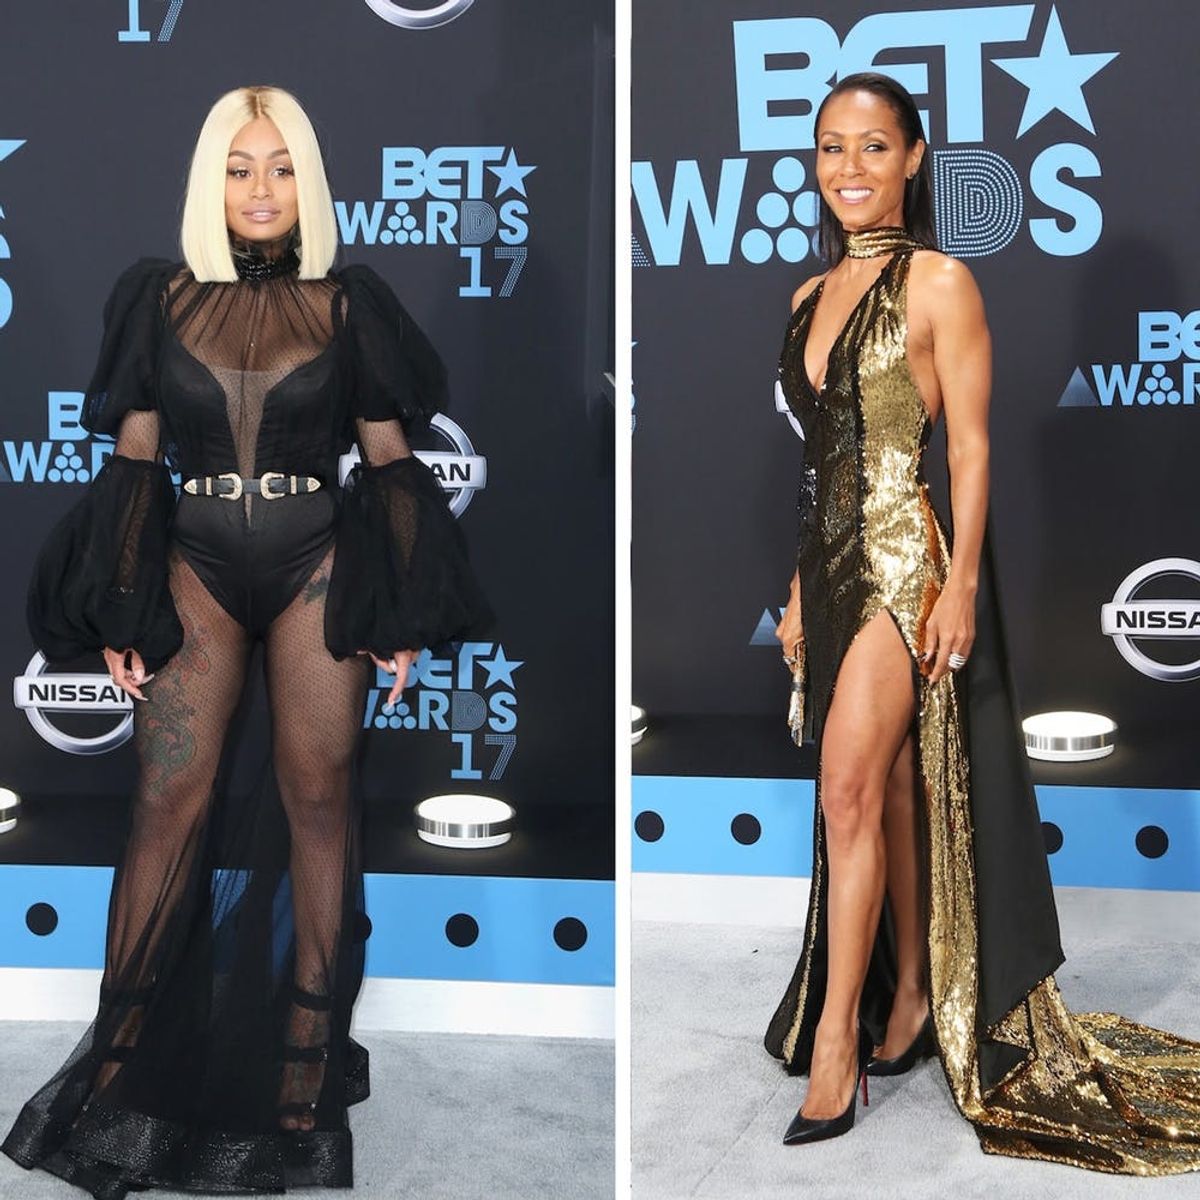 BET Awards 2017’s Most Showstopping Red Carpet Styles